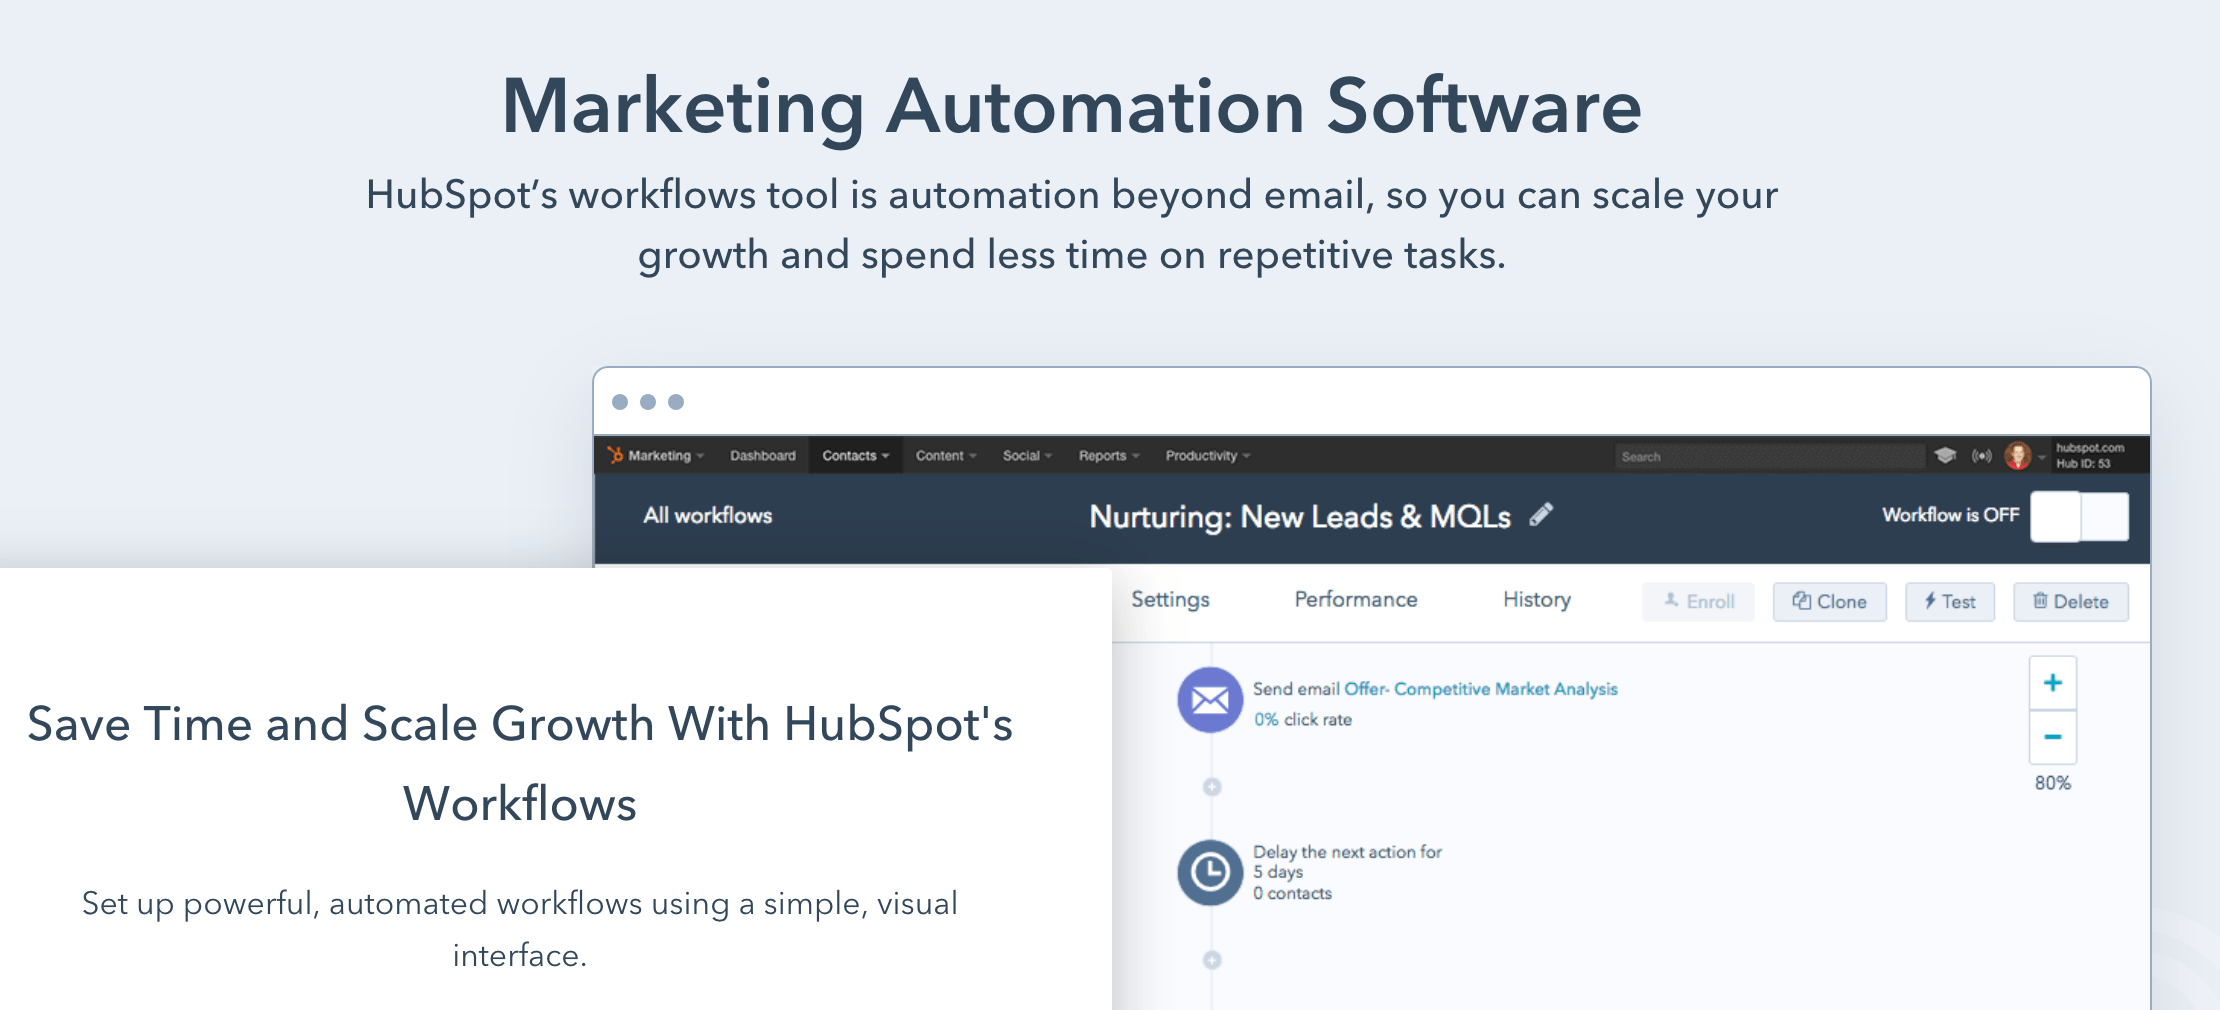 HubSpot marketing automation software home page.